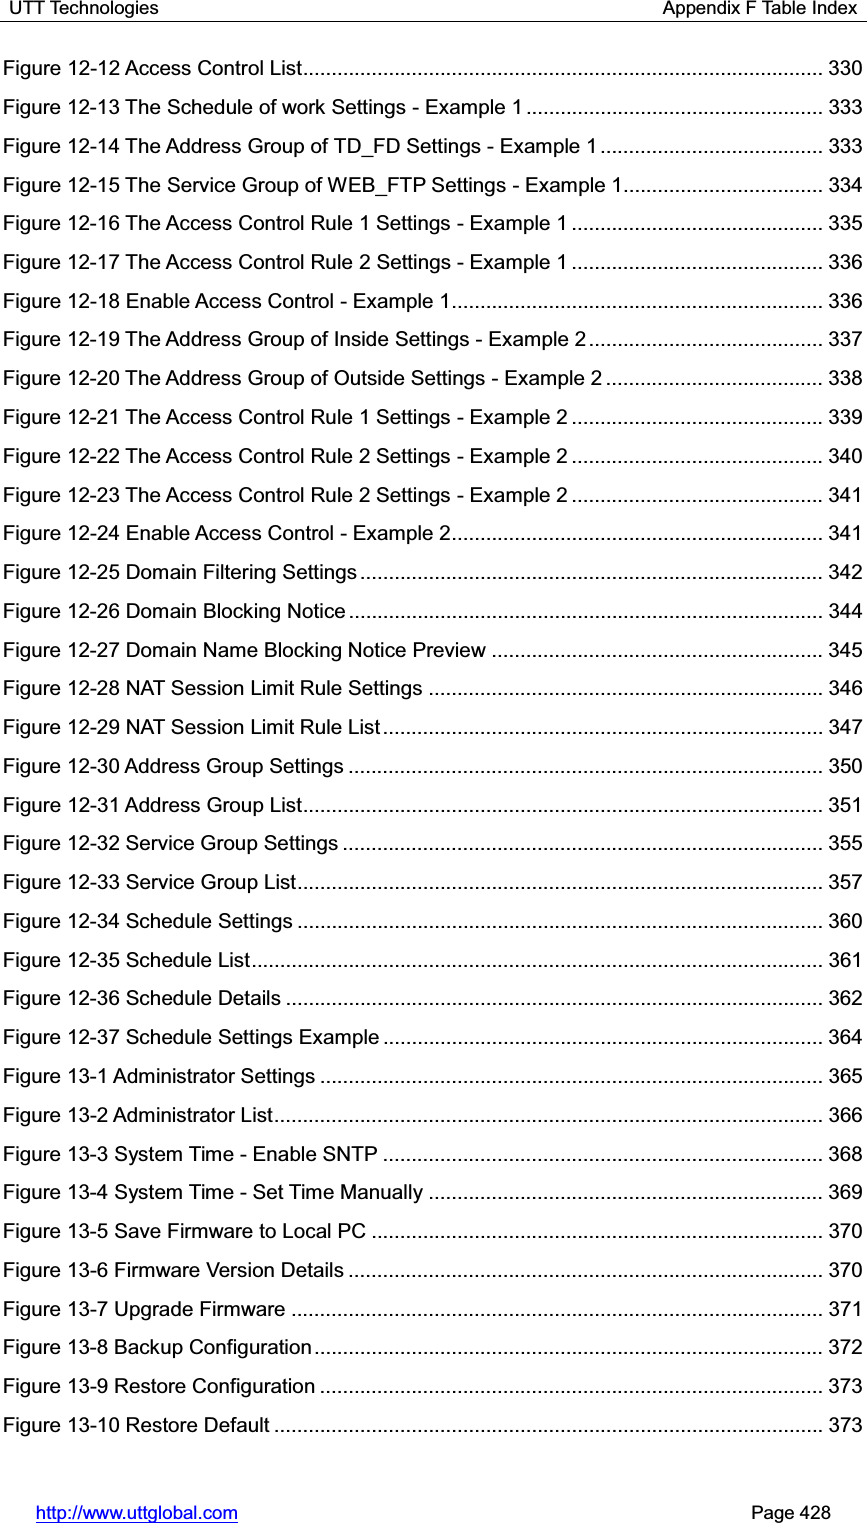 UTT Technologies                                                      Appendix F Table Index http://www.uttglobal.com                                                       Page 428 Figure 12-12 Access Control List ........................................................................................... 330Figure 12-13 The Schedule of work Settings - Example 1 .................................................... 333Figure 12-14 The Address Group of TD_FD Settings - Example 1 ....................................... 333Figure 12-15 The Service Group of WEB_FTP Settings - Example 1 ................................... 334Figure 12-16 The Access Control Rule 1 Settings - Example 1 ............................................ 335Figure 12-17 The Access Control Rule 2 Settings - Example 1 ............................................ 336Figure 12-18 Enable Access Control - Example 1 ................................................................. 336Figure 12-19 The Address Group of Inside Settings - Example 2 ......................................... 337Figure 12-20 The Address Group of Outside Settings - Example 2 ...................................... 338Figure 12-21 The Access Control Rule 1 Settings - Example 2 ............................................ 339Figure 12-22 The Access Control Rule 2 Settings - Example 2 ............................................ 340Figure 12-23 The Access Control Rule 2 Settings - Example 2 ............................................ 341Figure 12-24 Enable Access Control - Example 2 ................................................................. 341Figure 12-25 Domain Filtering Settings ................................................................................. 342Figure 12-26 Domain Blocking Notice ................................................................................... 344Figure 12-27 Domain Name Blocking Notice Preview .......................................................... 345Figure 12-28 NAT Session Limit Rule Settings ..................................................................... 346Figure 12-29 NAT Session Limit Rule List ............................................................................. 347Figure 12-30 Address Group Settings ................................................................................... 350Figure 12-31 Address Group List ........................................................................................... 351Figure 12-32 Service Group Settings .................................................................................... 355Figure 12-33 Service Group List ............................................................................................ 357Figure 12-34 Schedule Settings ............................................................................................ 360Figure 12-35 Schedule List .................................................................................................... 361Figure 12-36 Schedule Details .............................................................................................. 362Figure 12-37 Schedule Settings Example ............................................................................. 364Figure 13-1 Administrator Settings ........................................................................................ 365Figure 13-2 Administrator List ................................................................................................ 366Figure 13-3 System Time - Enable SNTP ............................................................................. 368Figure 13-4 System Time - Set Time Manually ..................................................................... 369Figure 13-5 Save Firmware to Local PC ............................................................................... 370Figure 13-6 Firmware Version Details ................................................................................... 370Figure 13-7 Upgrade Firmware ............................................................................................. 371Figure 13-8 Backup Configuration ......................................................................................... 372Figure 13-9 Restore Configuration ........................................................................................ 373Figure 13-10 Restore Default ................................................................................................ 373